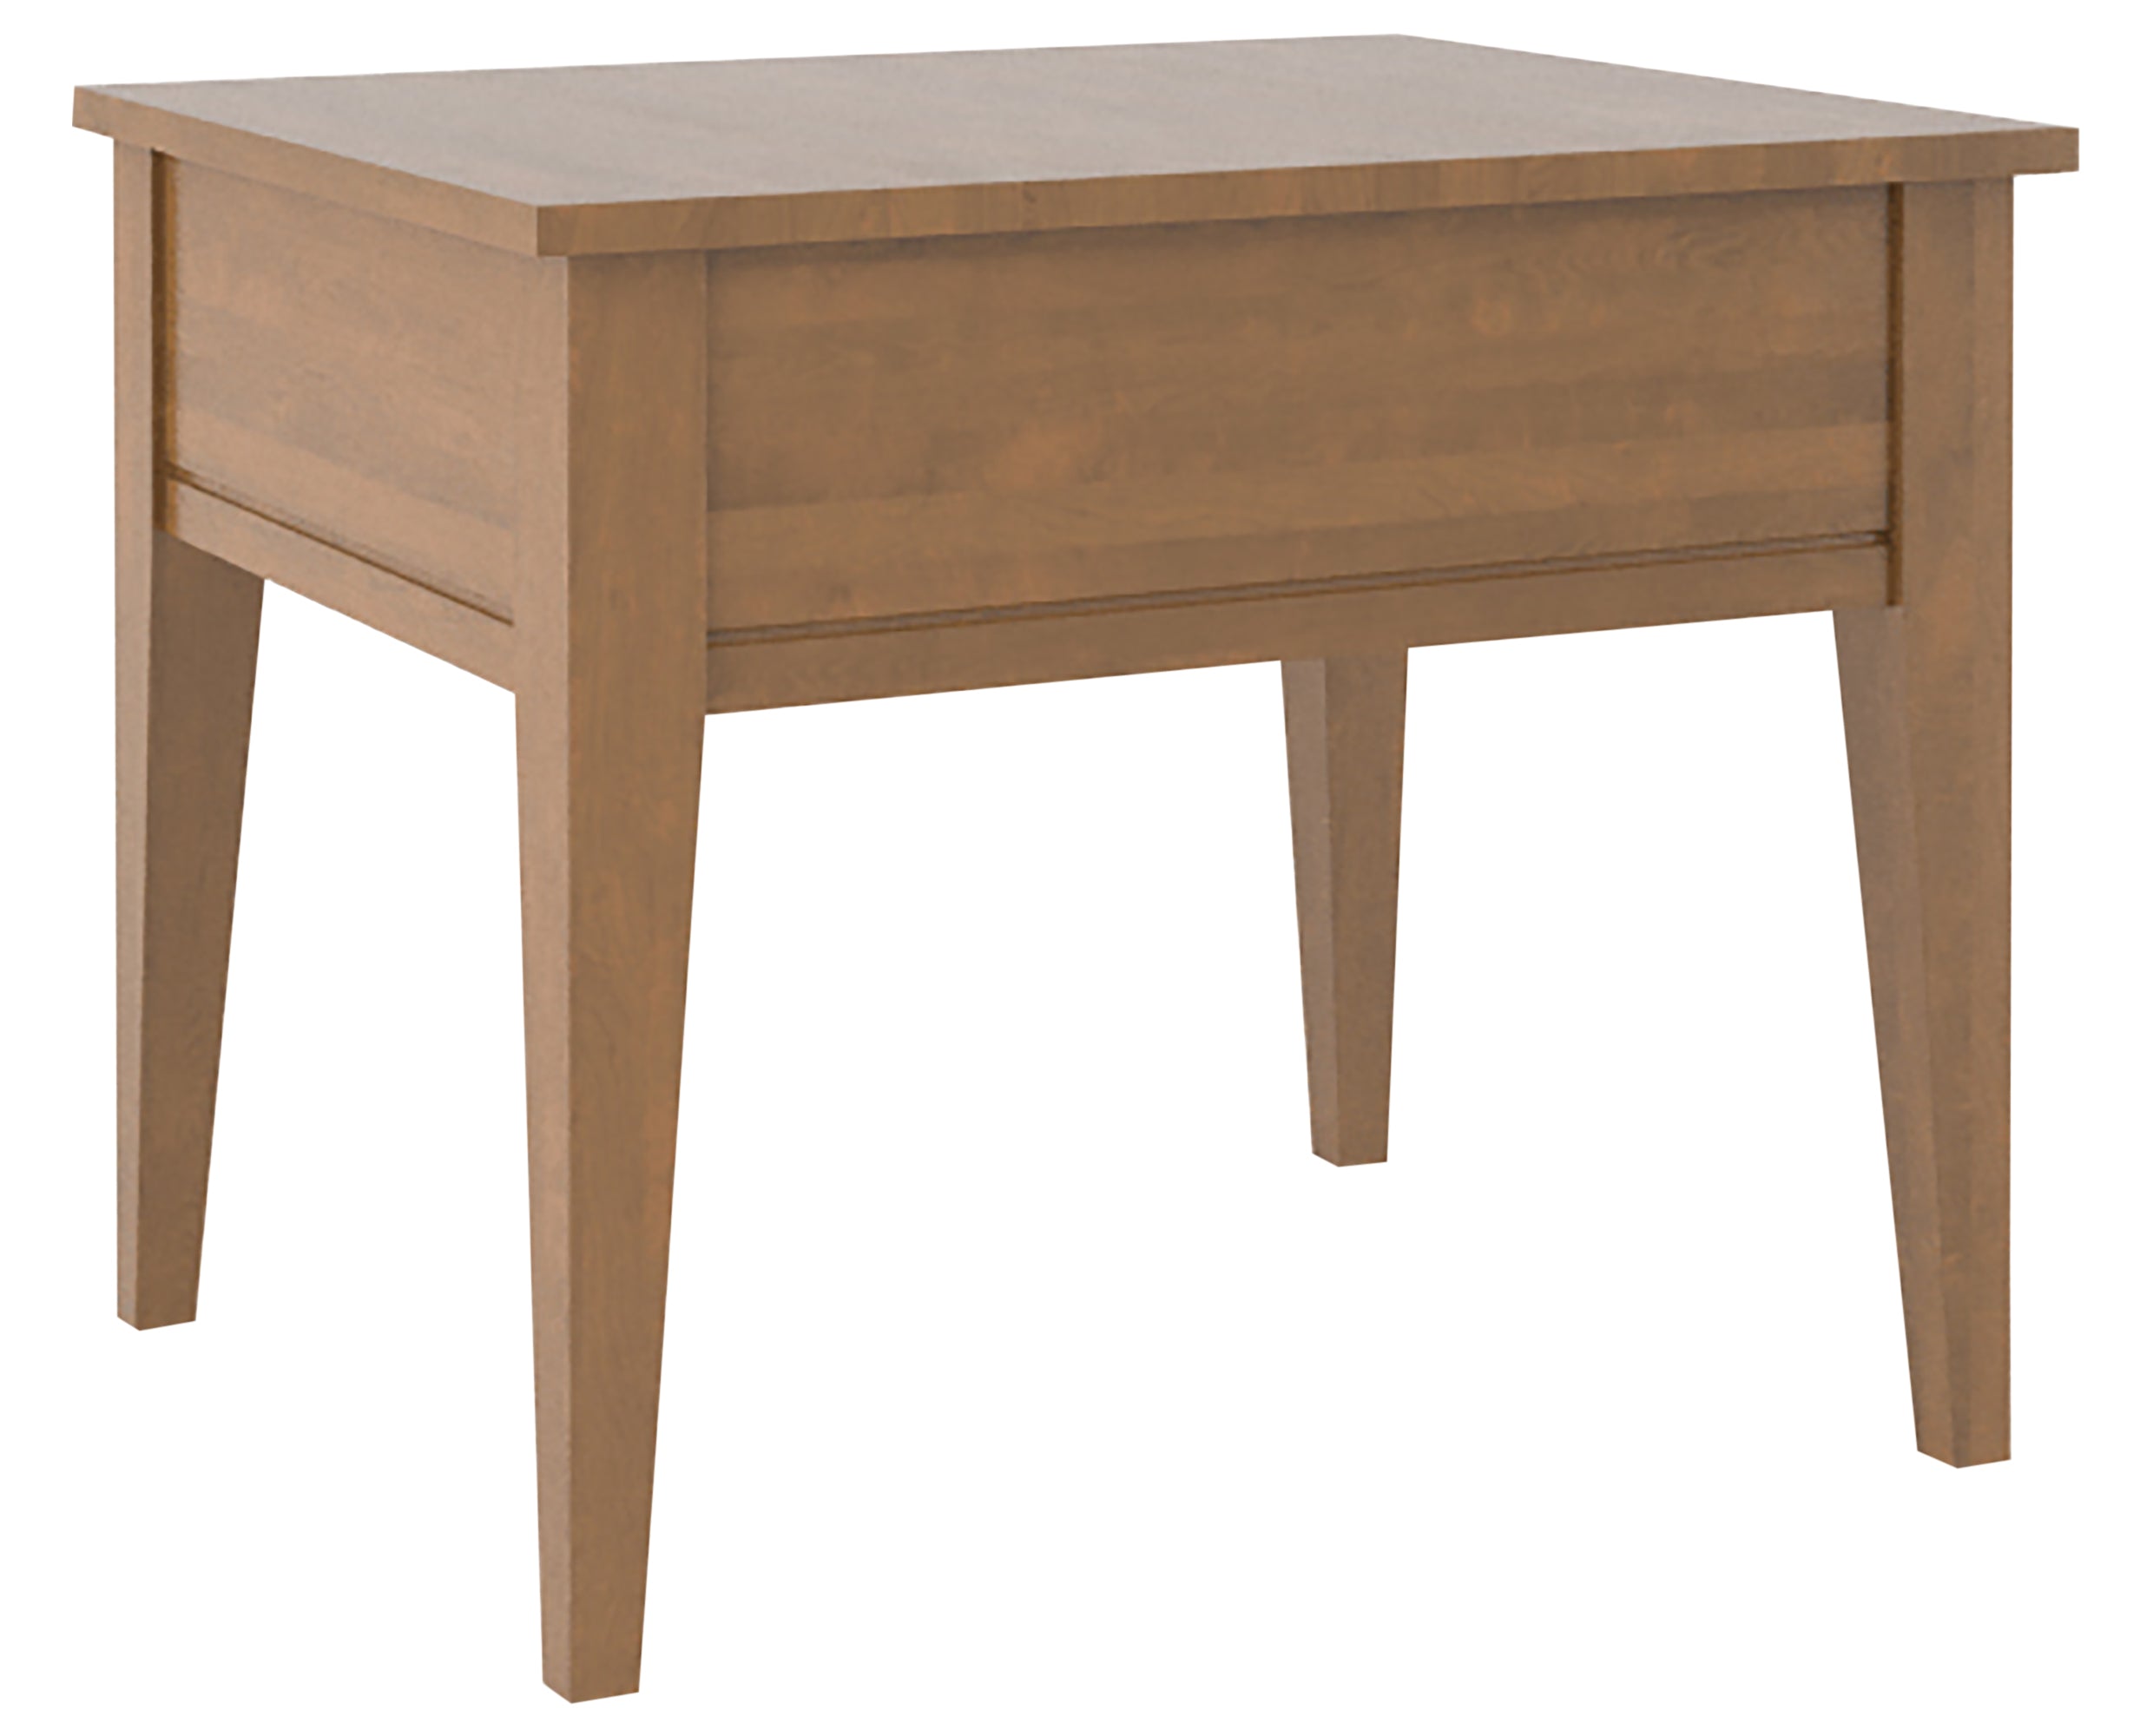 Oak Washed | Canadel Living End Table 2722 | Valley Ridge Furniture